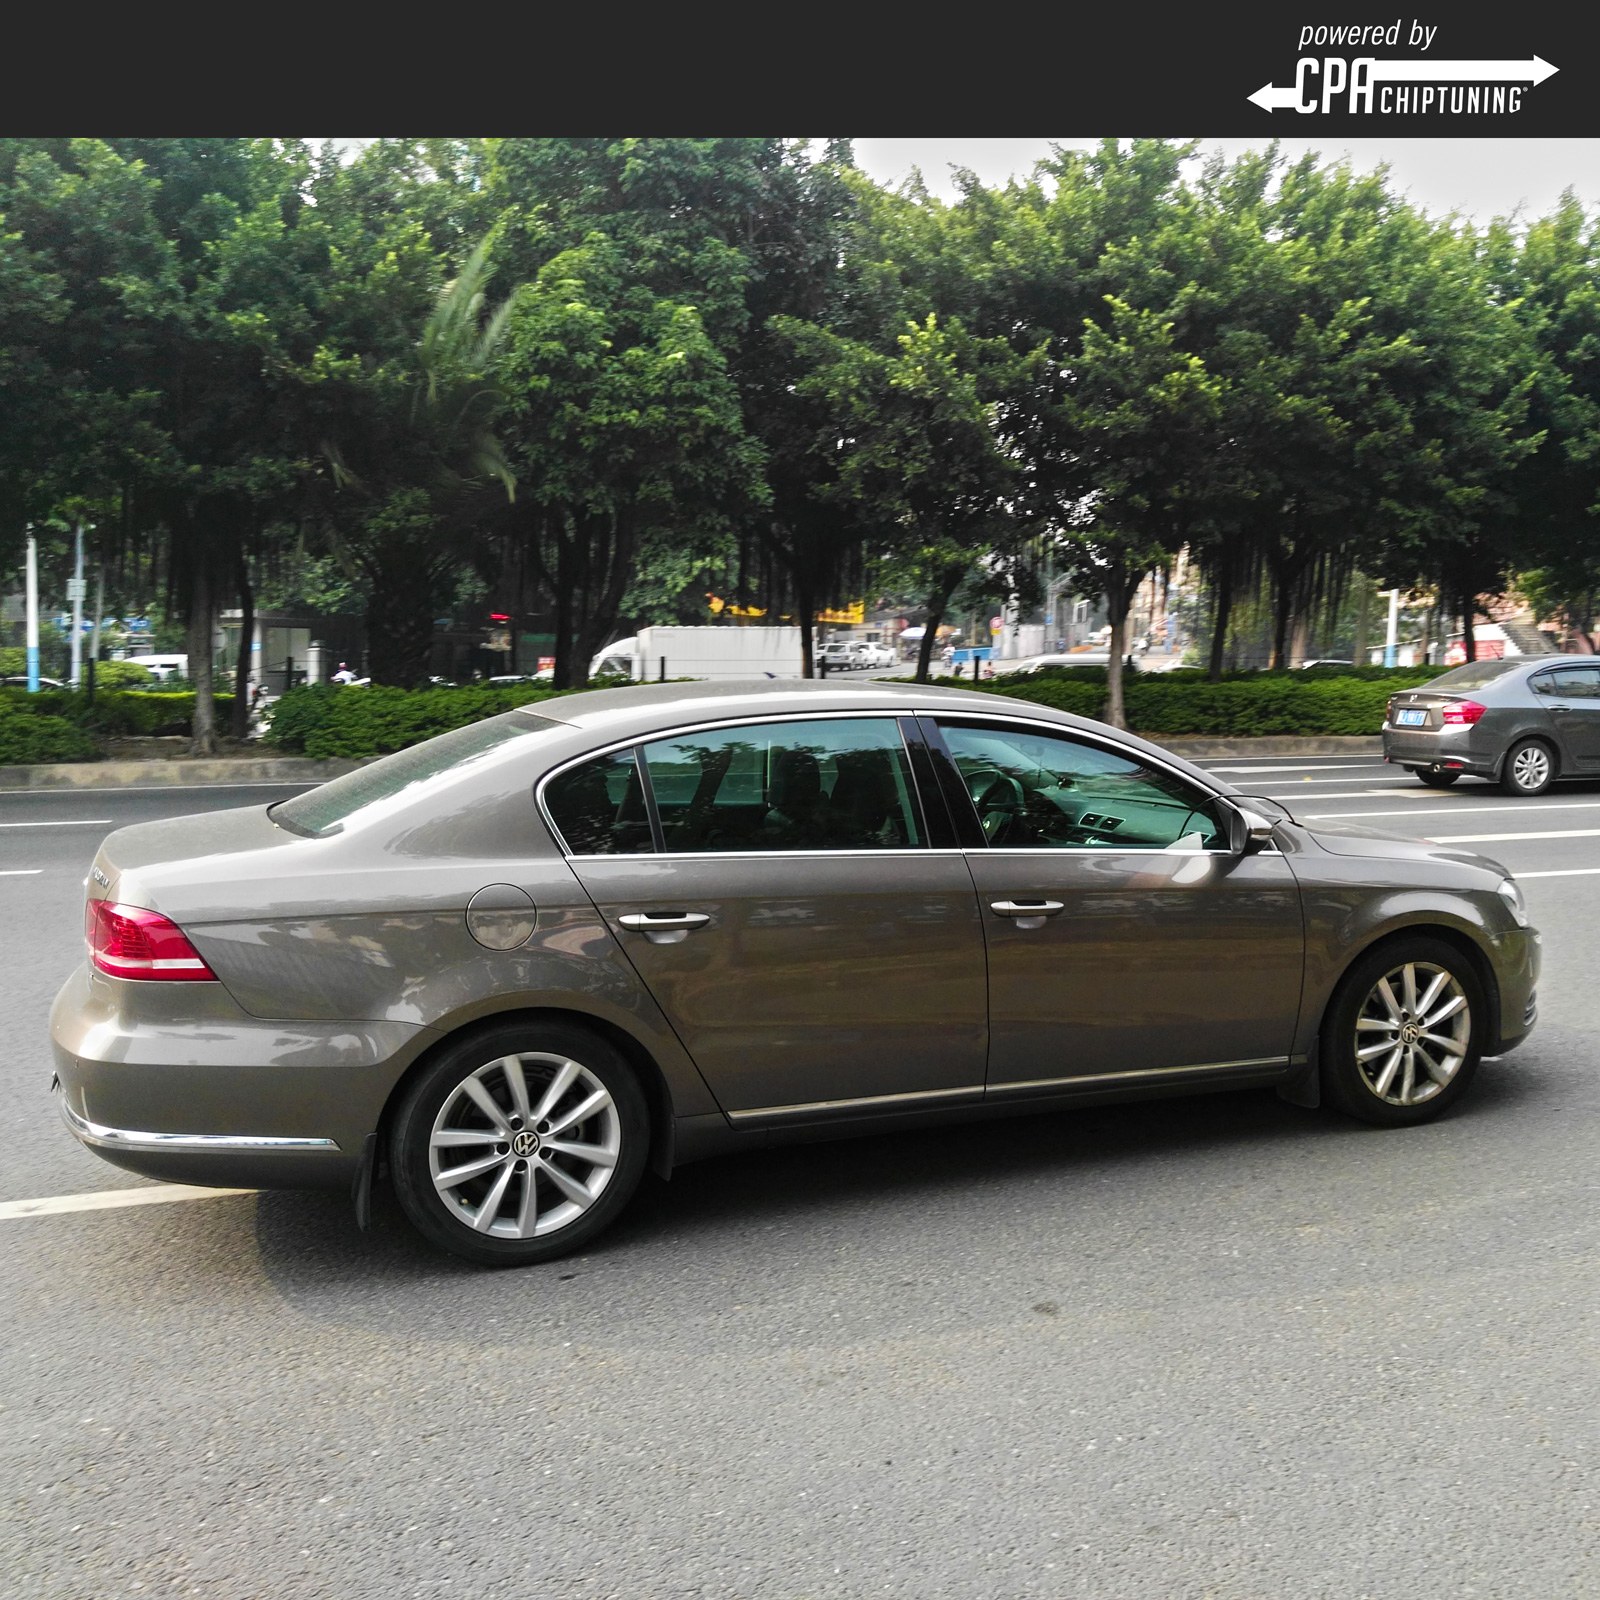 The tip of the approvals - VW Passat 1.4 TSI